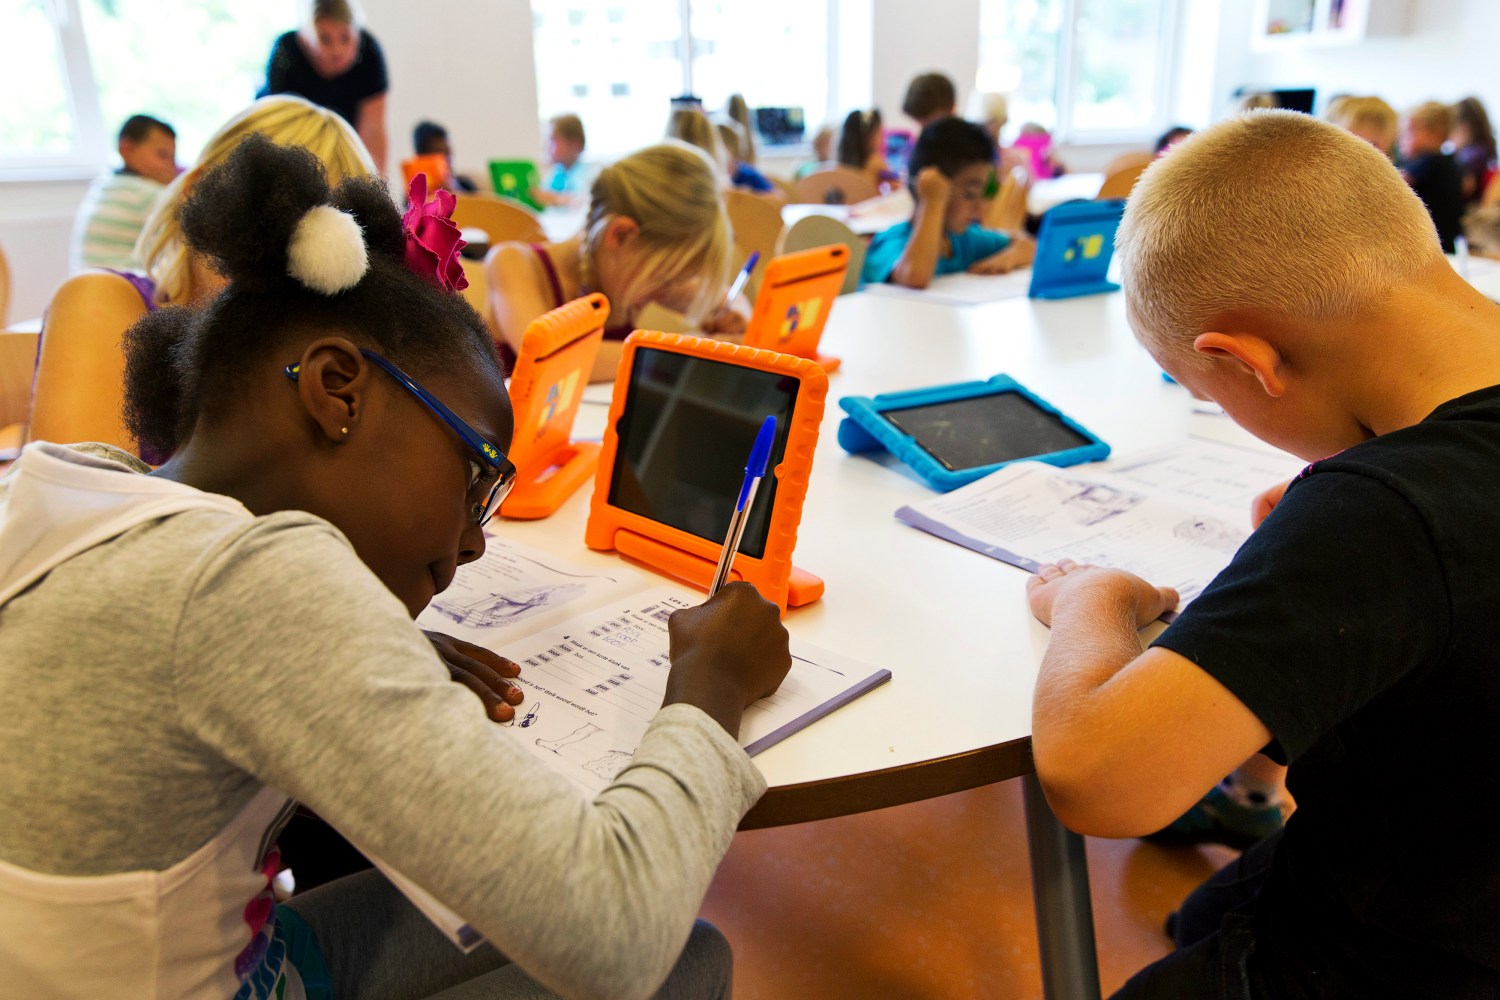 Students take notes from their iPads at the Steve Jobs school in Sneek